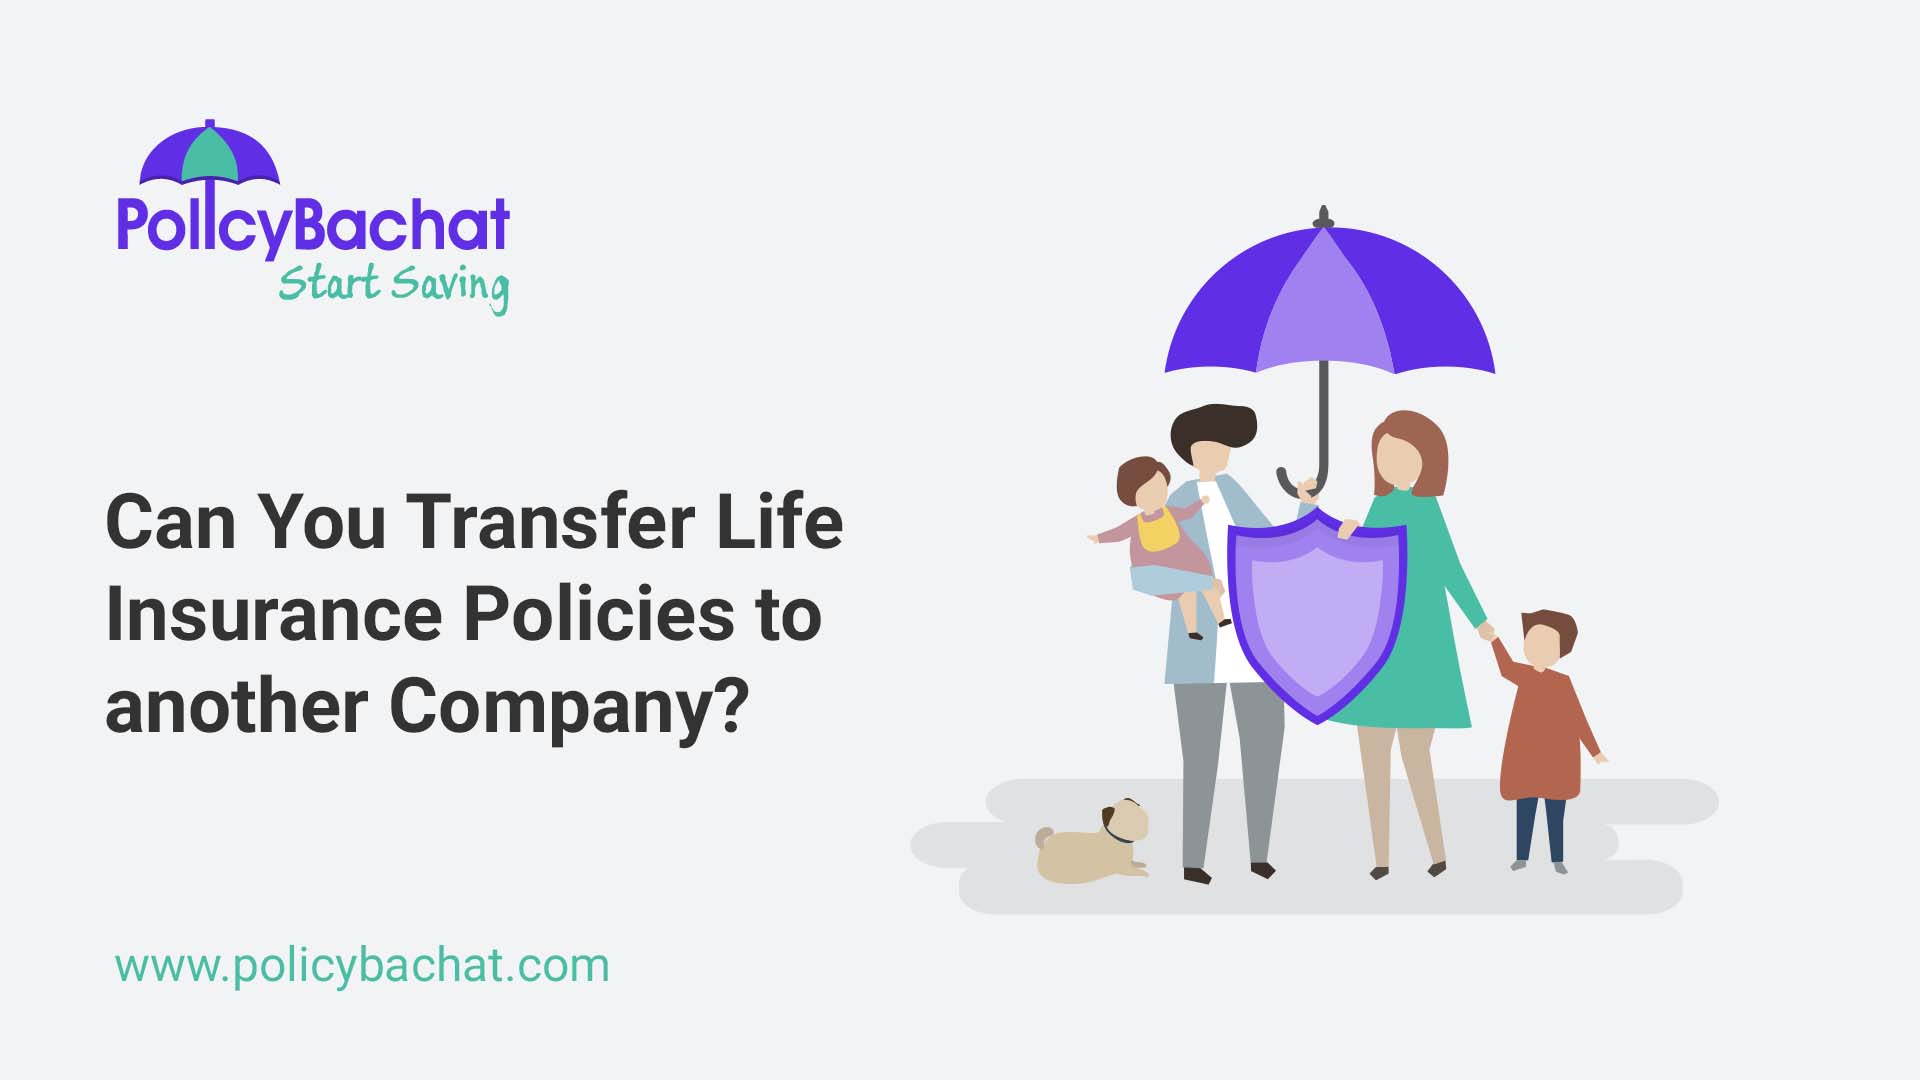 Can You Transfer Life Insurance to Another Company?